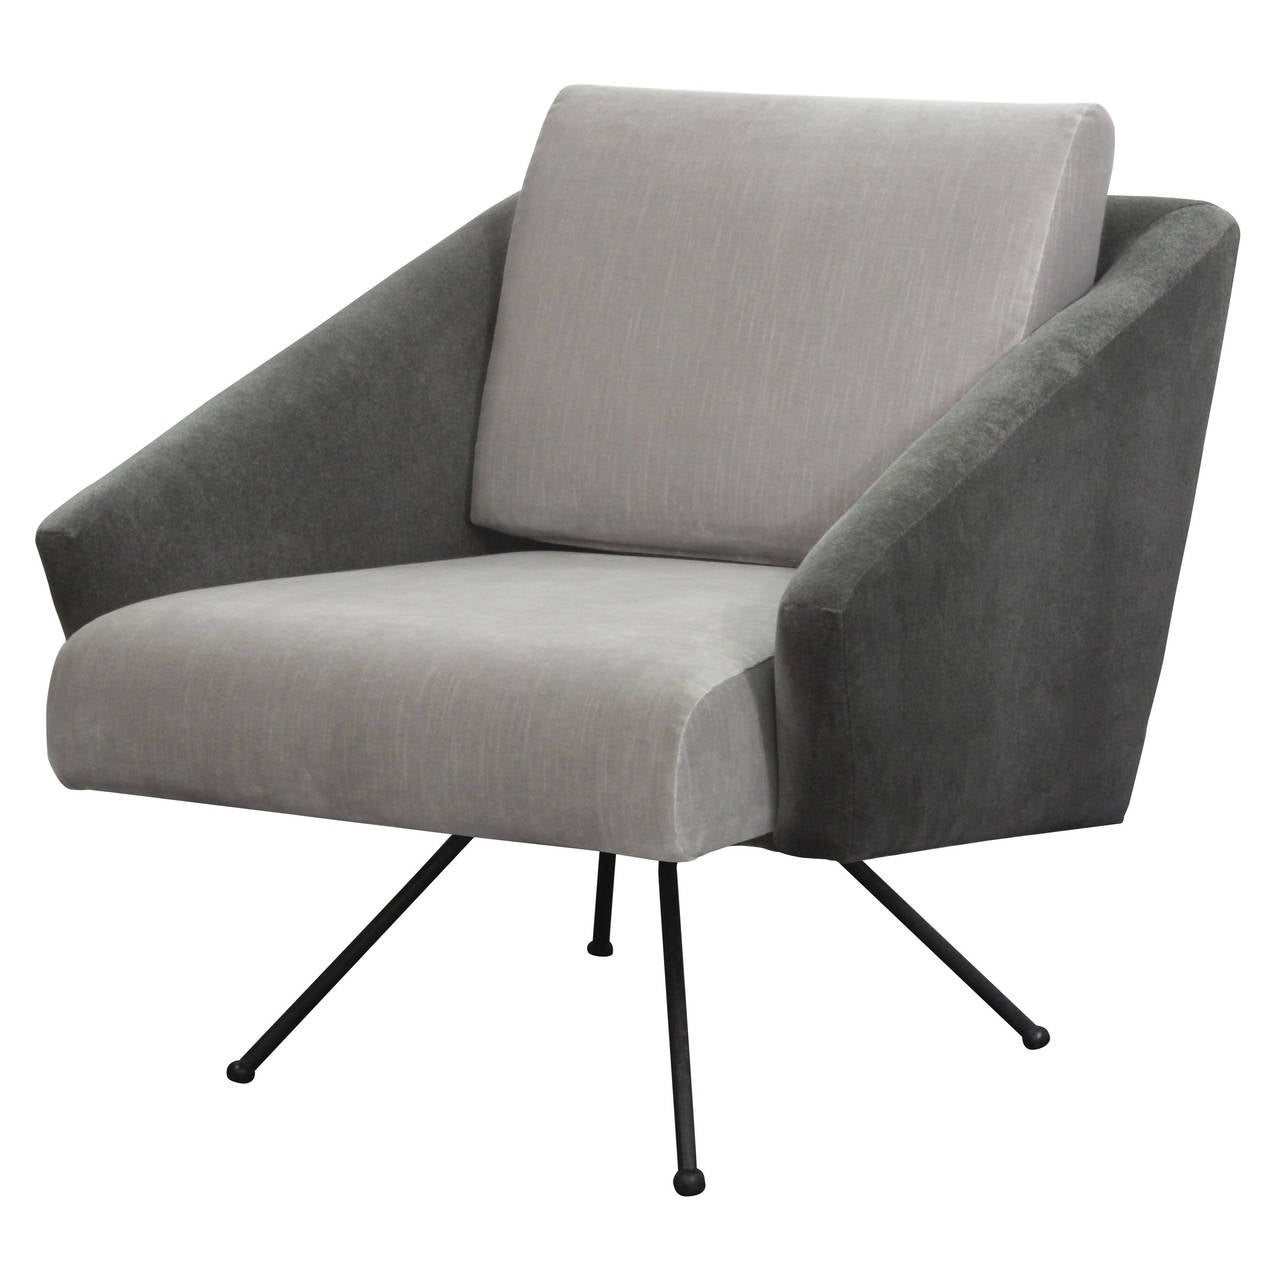 Italian Swiveling Sculptural Lounge Chair with Splayed Legs